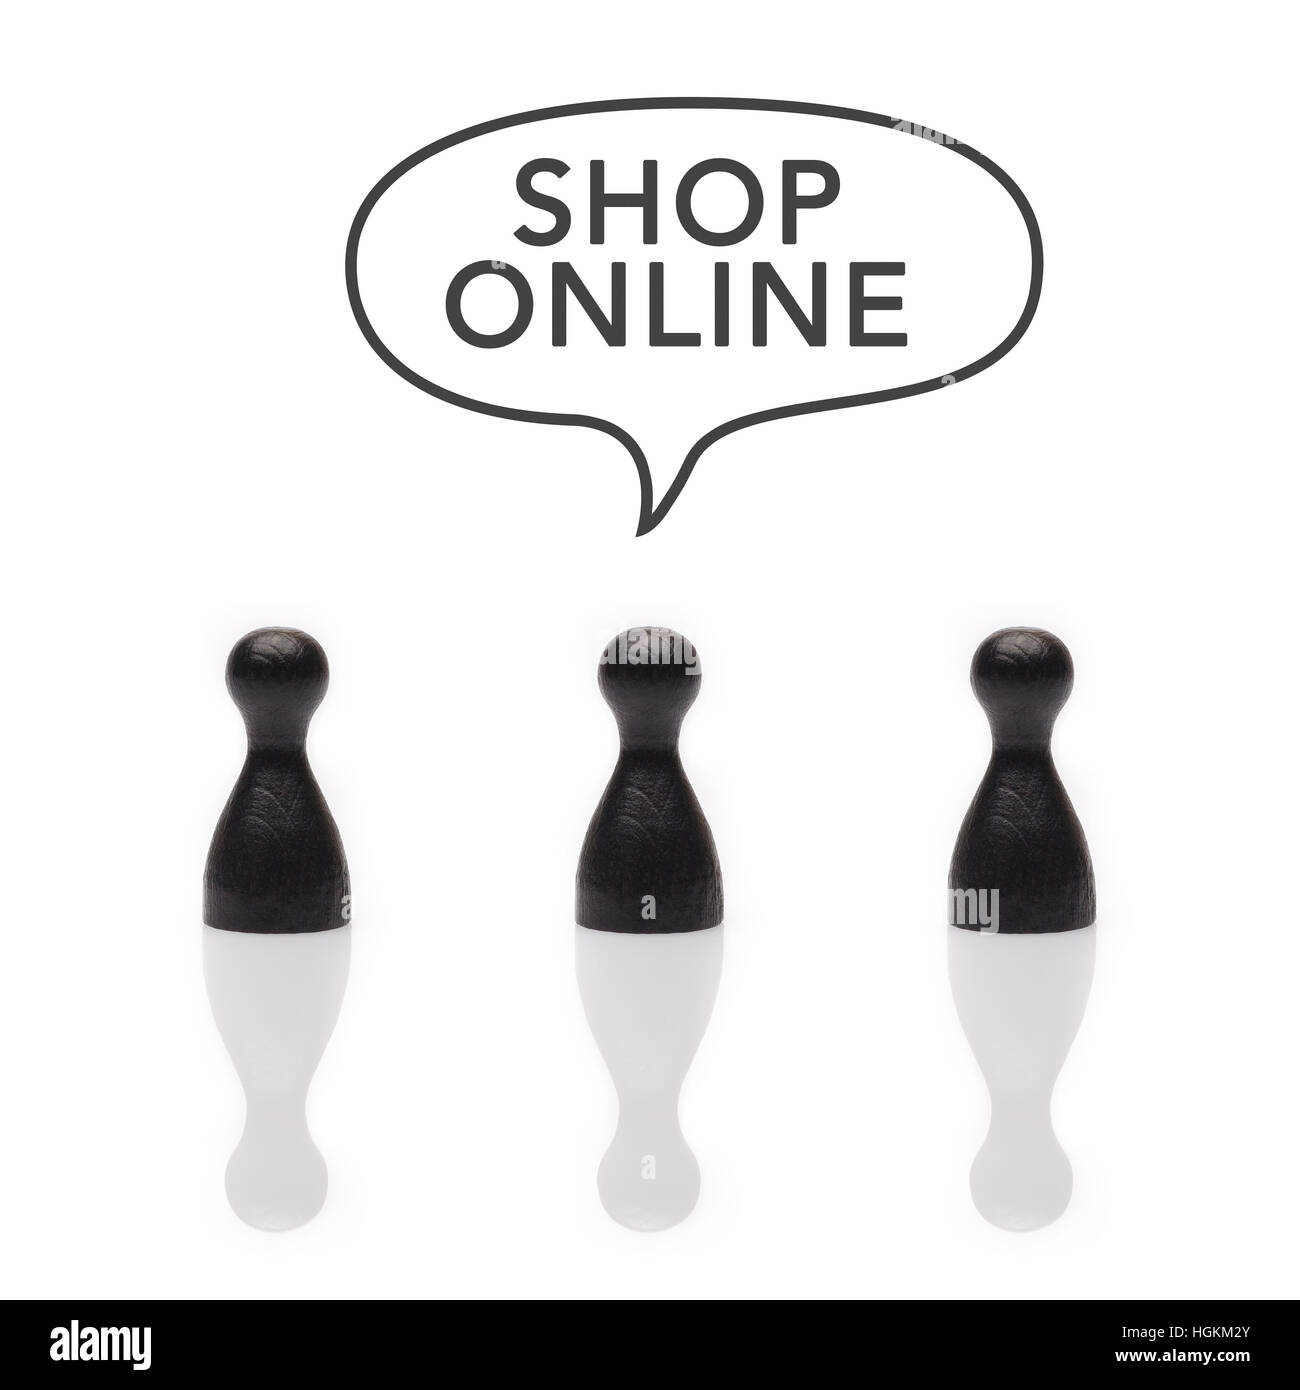 Black pawns say 'shop online' with text balloon in black and white Stock Photo